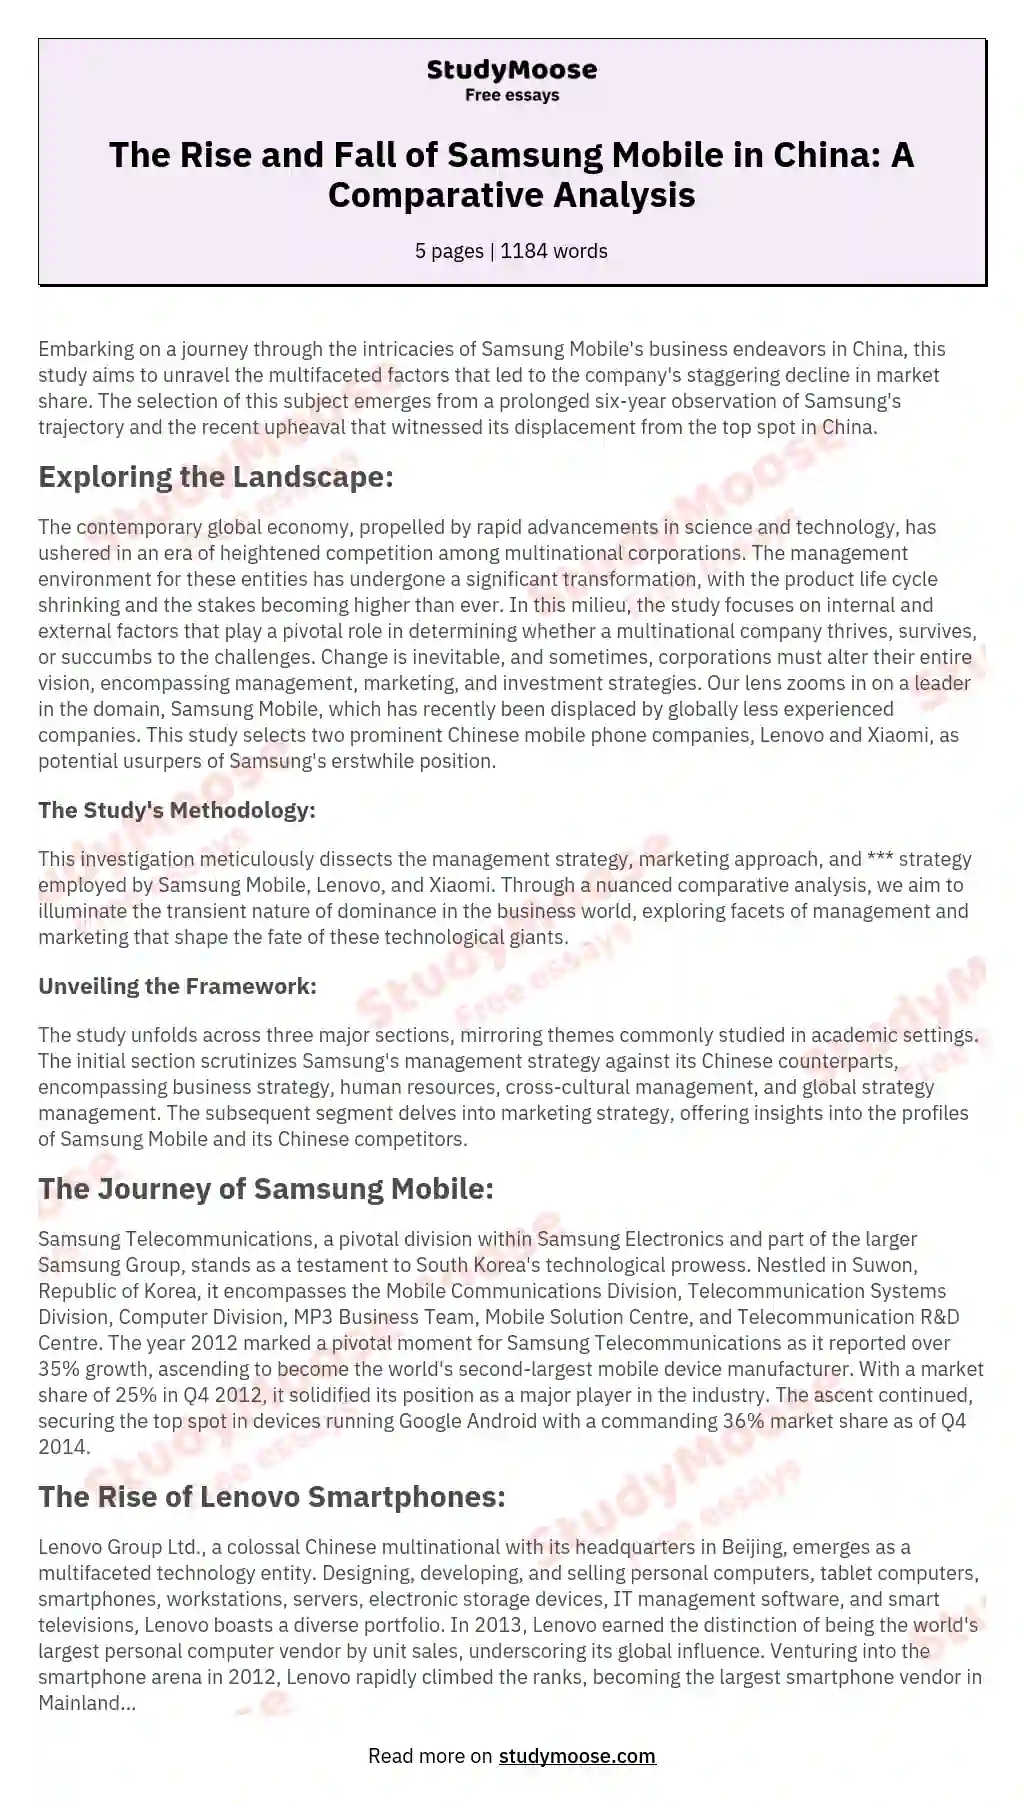 The Rise and Fall of Samsung Mobile in China: A Comparative Analysis essay